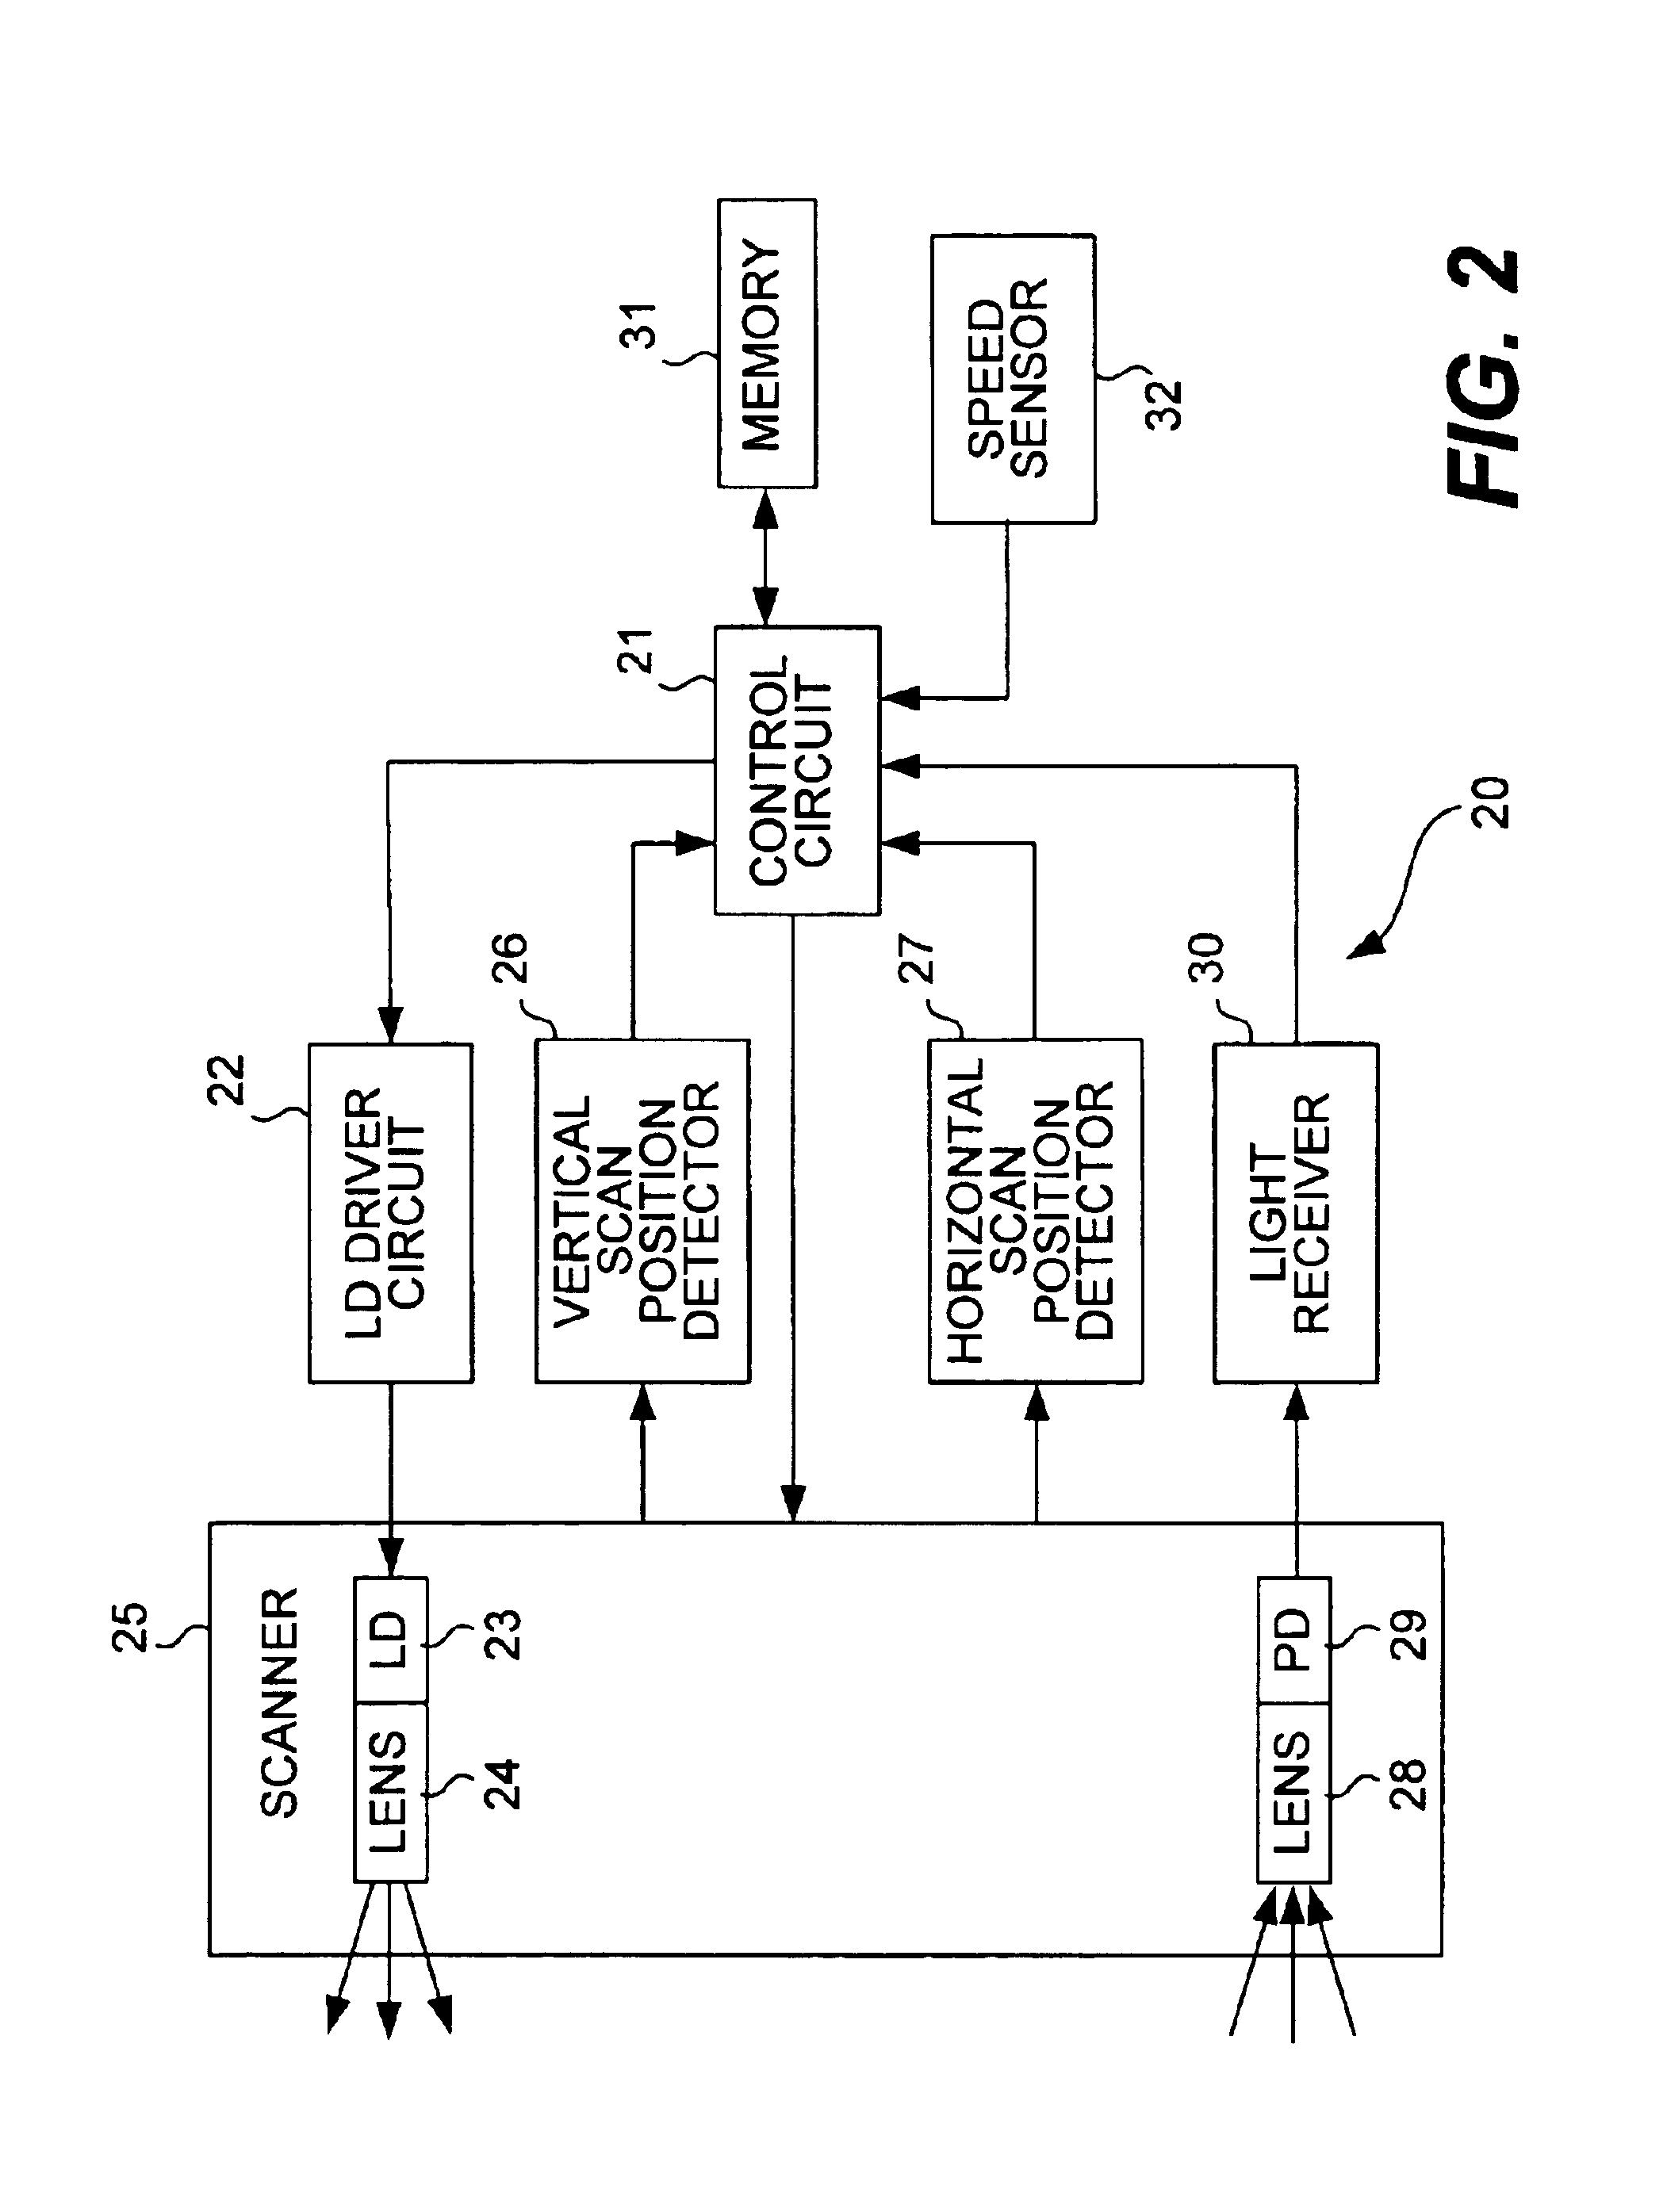 Object detecting device and method with means for controlling direction of scan by electromagnetic waves